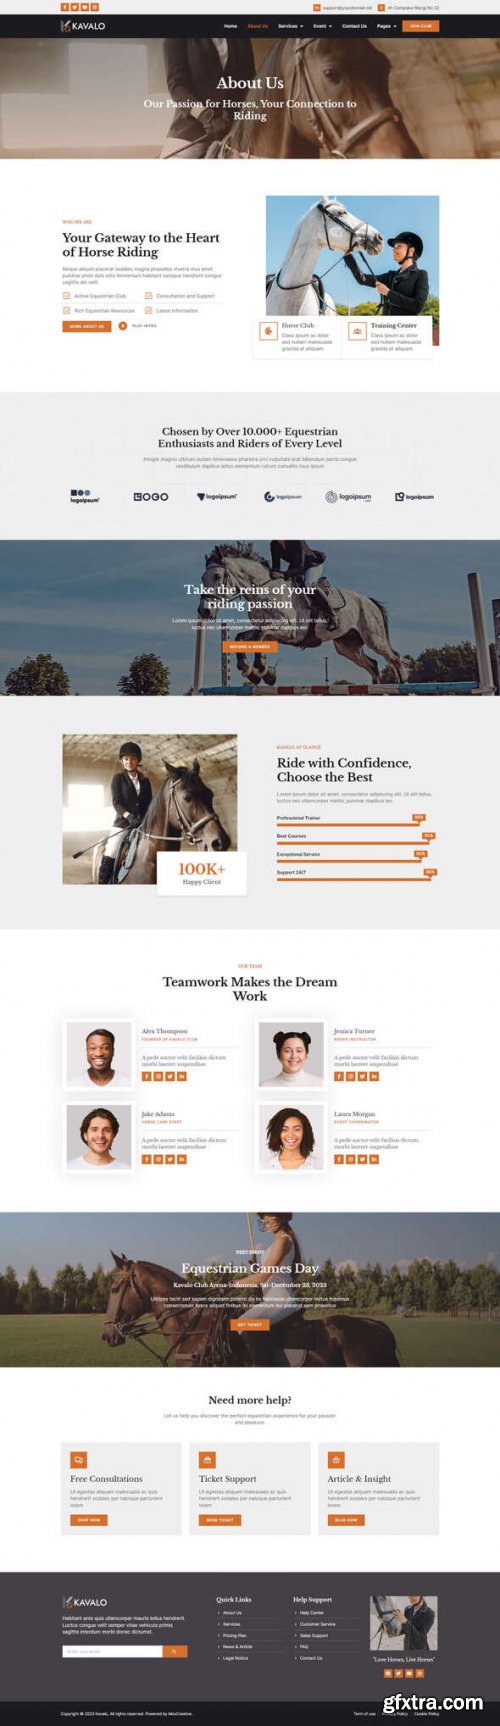 Themeforest - Kavalo - Horse Riding Club Elementor Pro Template Kit 49275330 v1.0.0 - Nulled